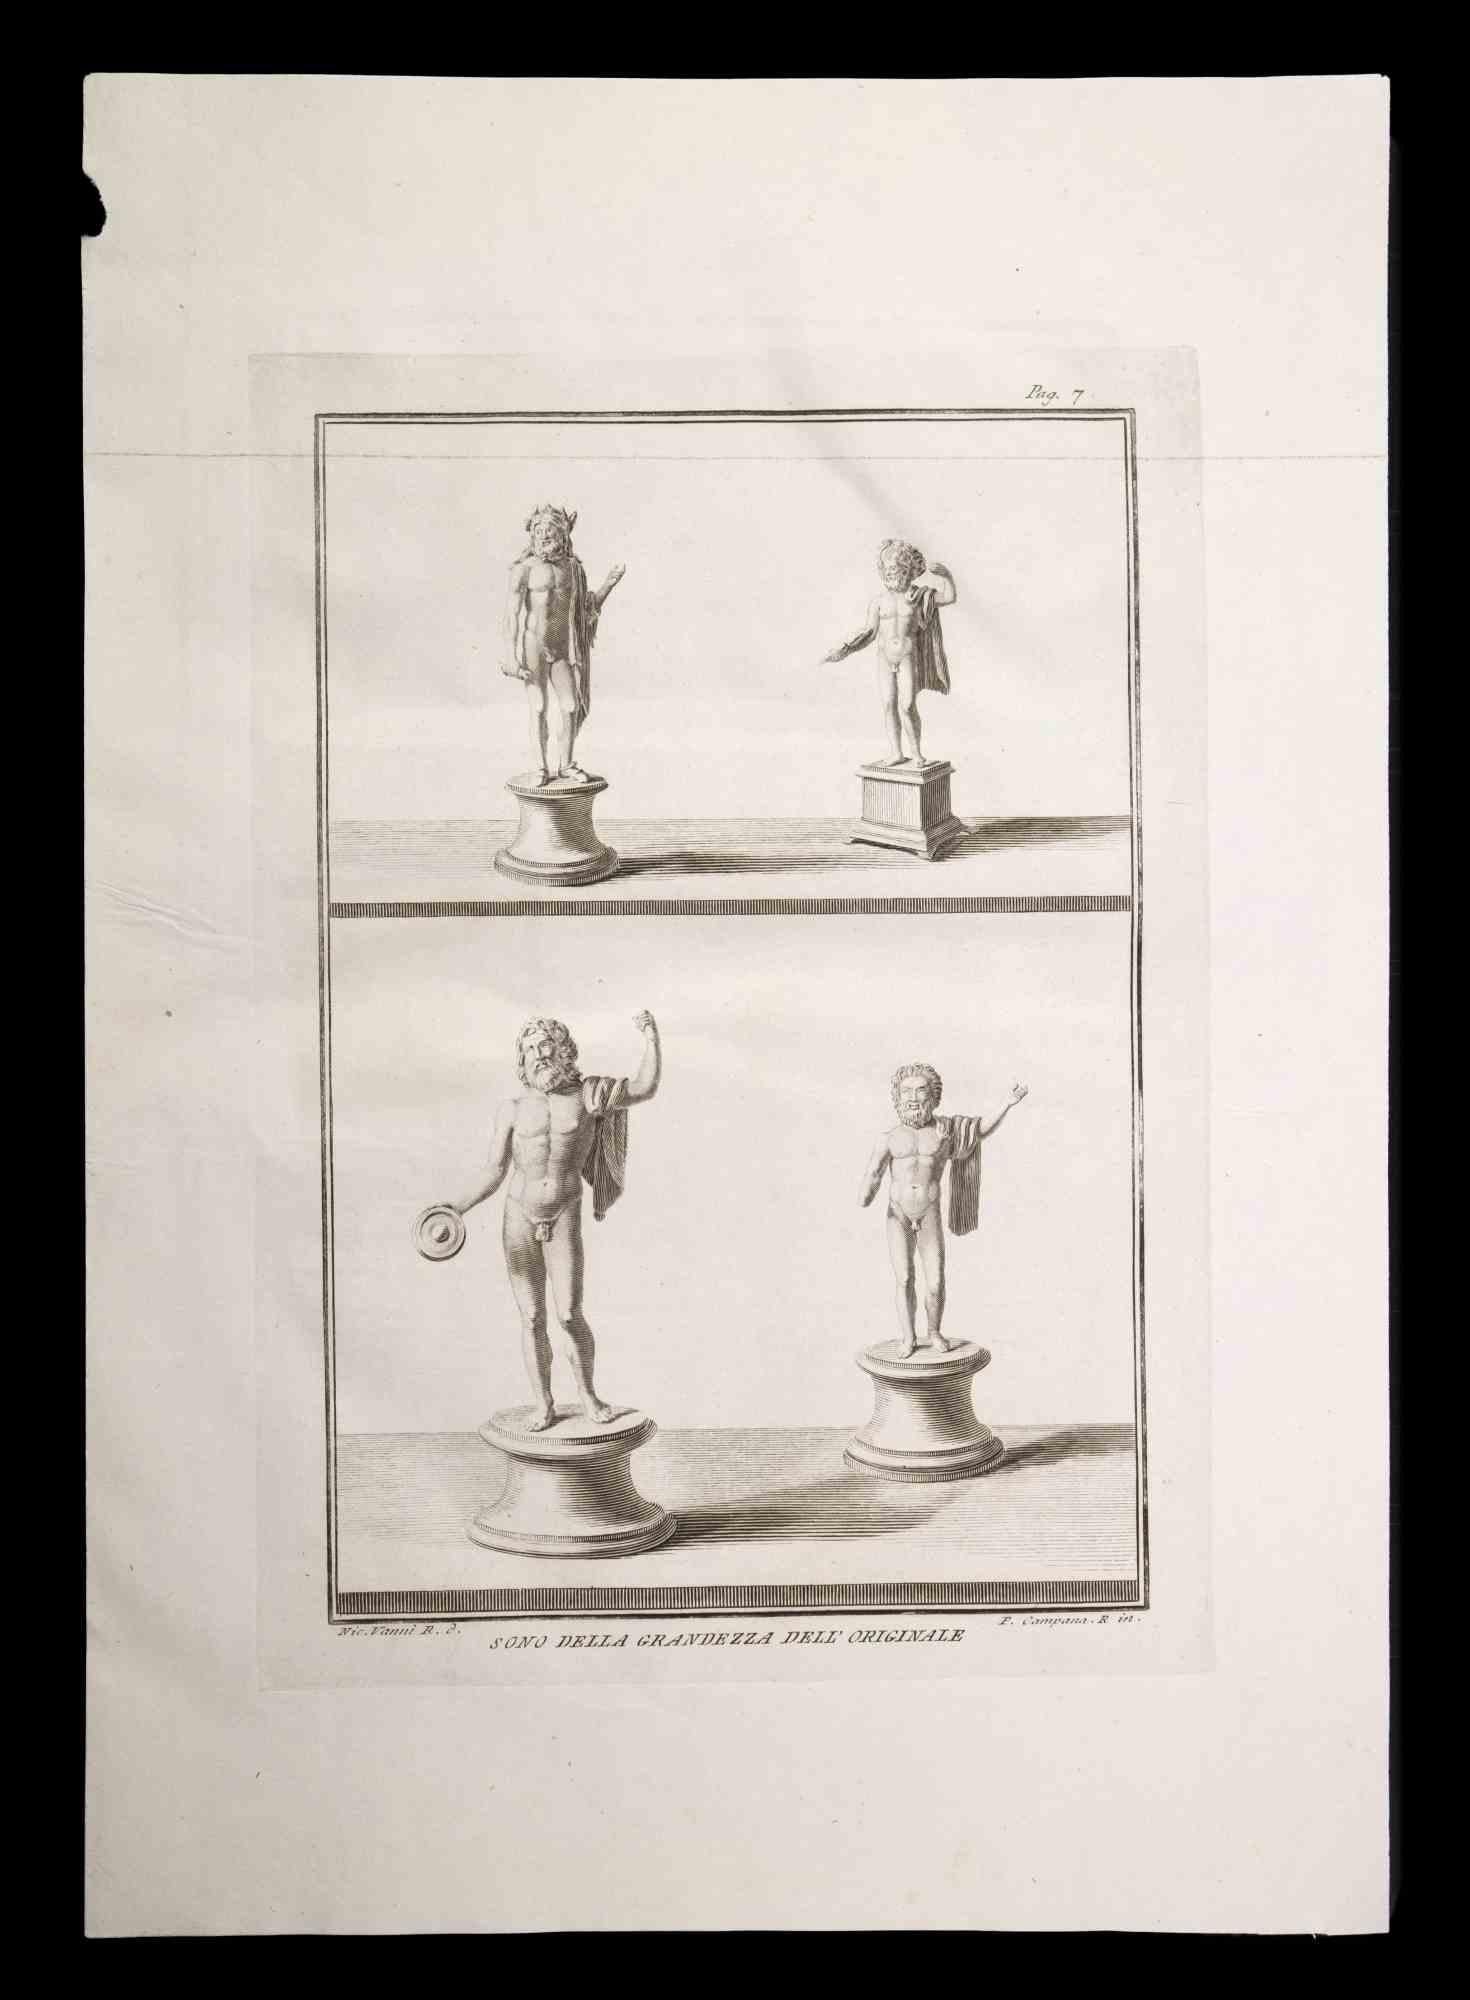 Ancient Roman Statue, from the series "Antiquities of Herculaneum", is an original etching on paper realized by P. Campana in the 18th Century.

Signed on the plate, on the lower right.

Good conditions.

The etching belongs to the print suite